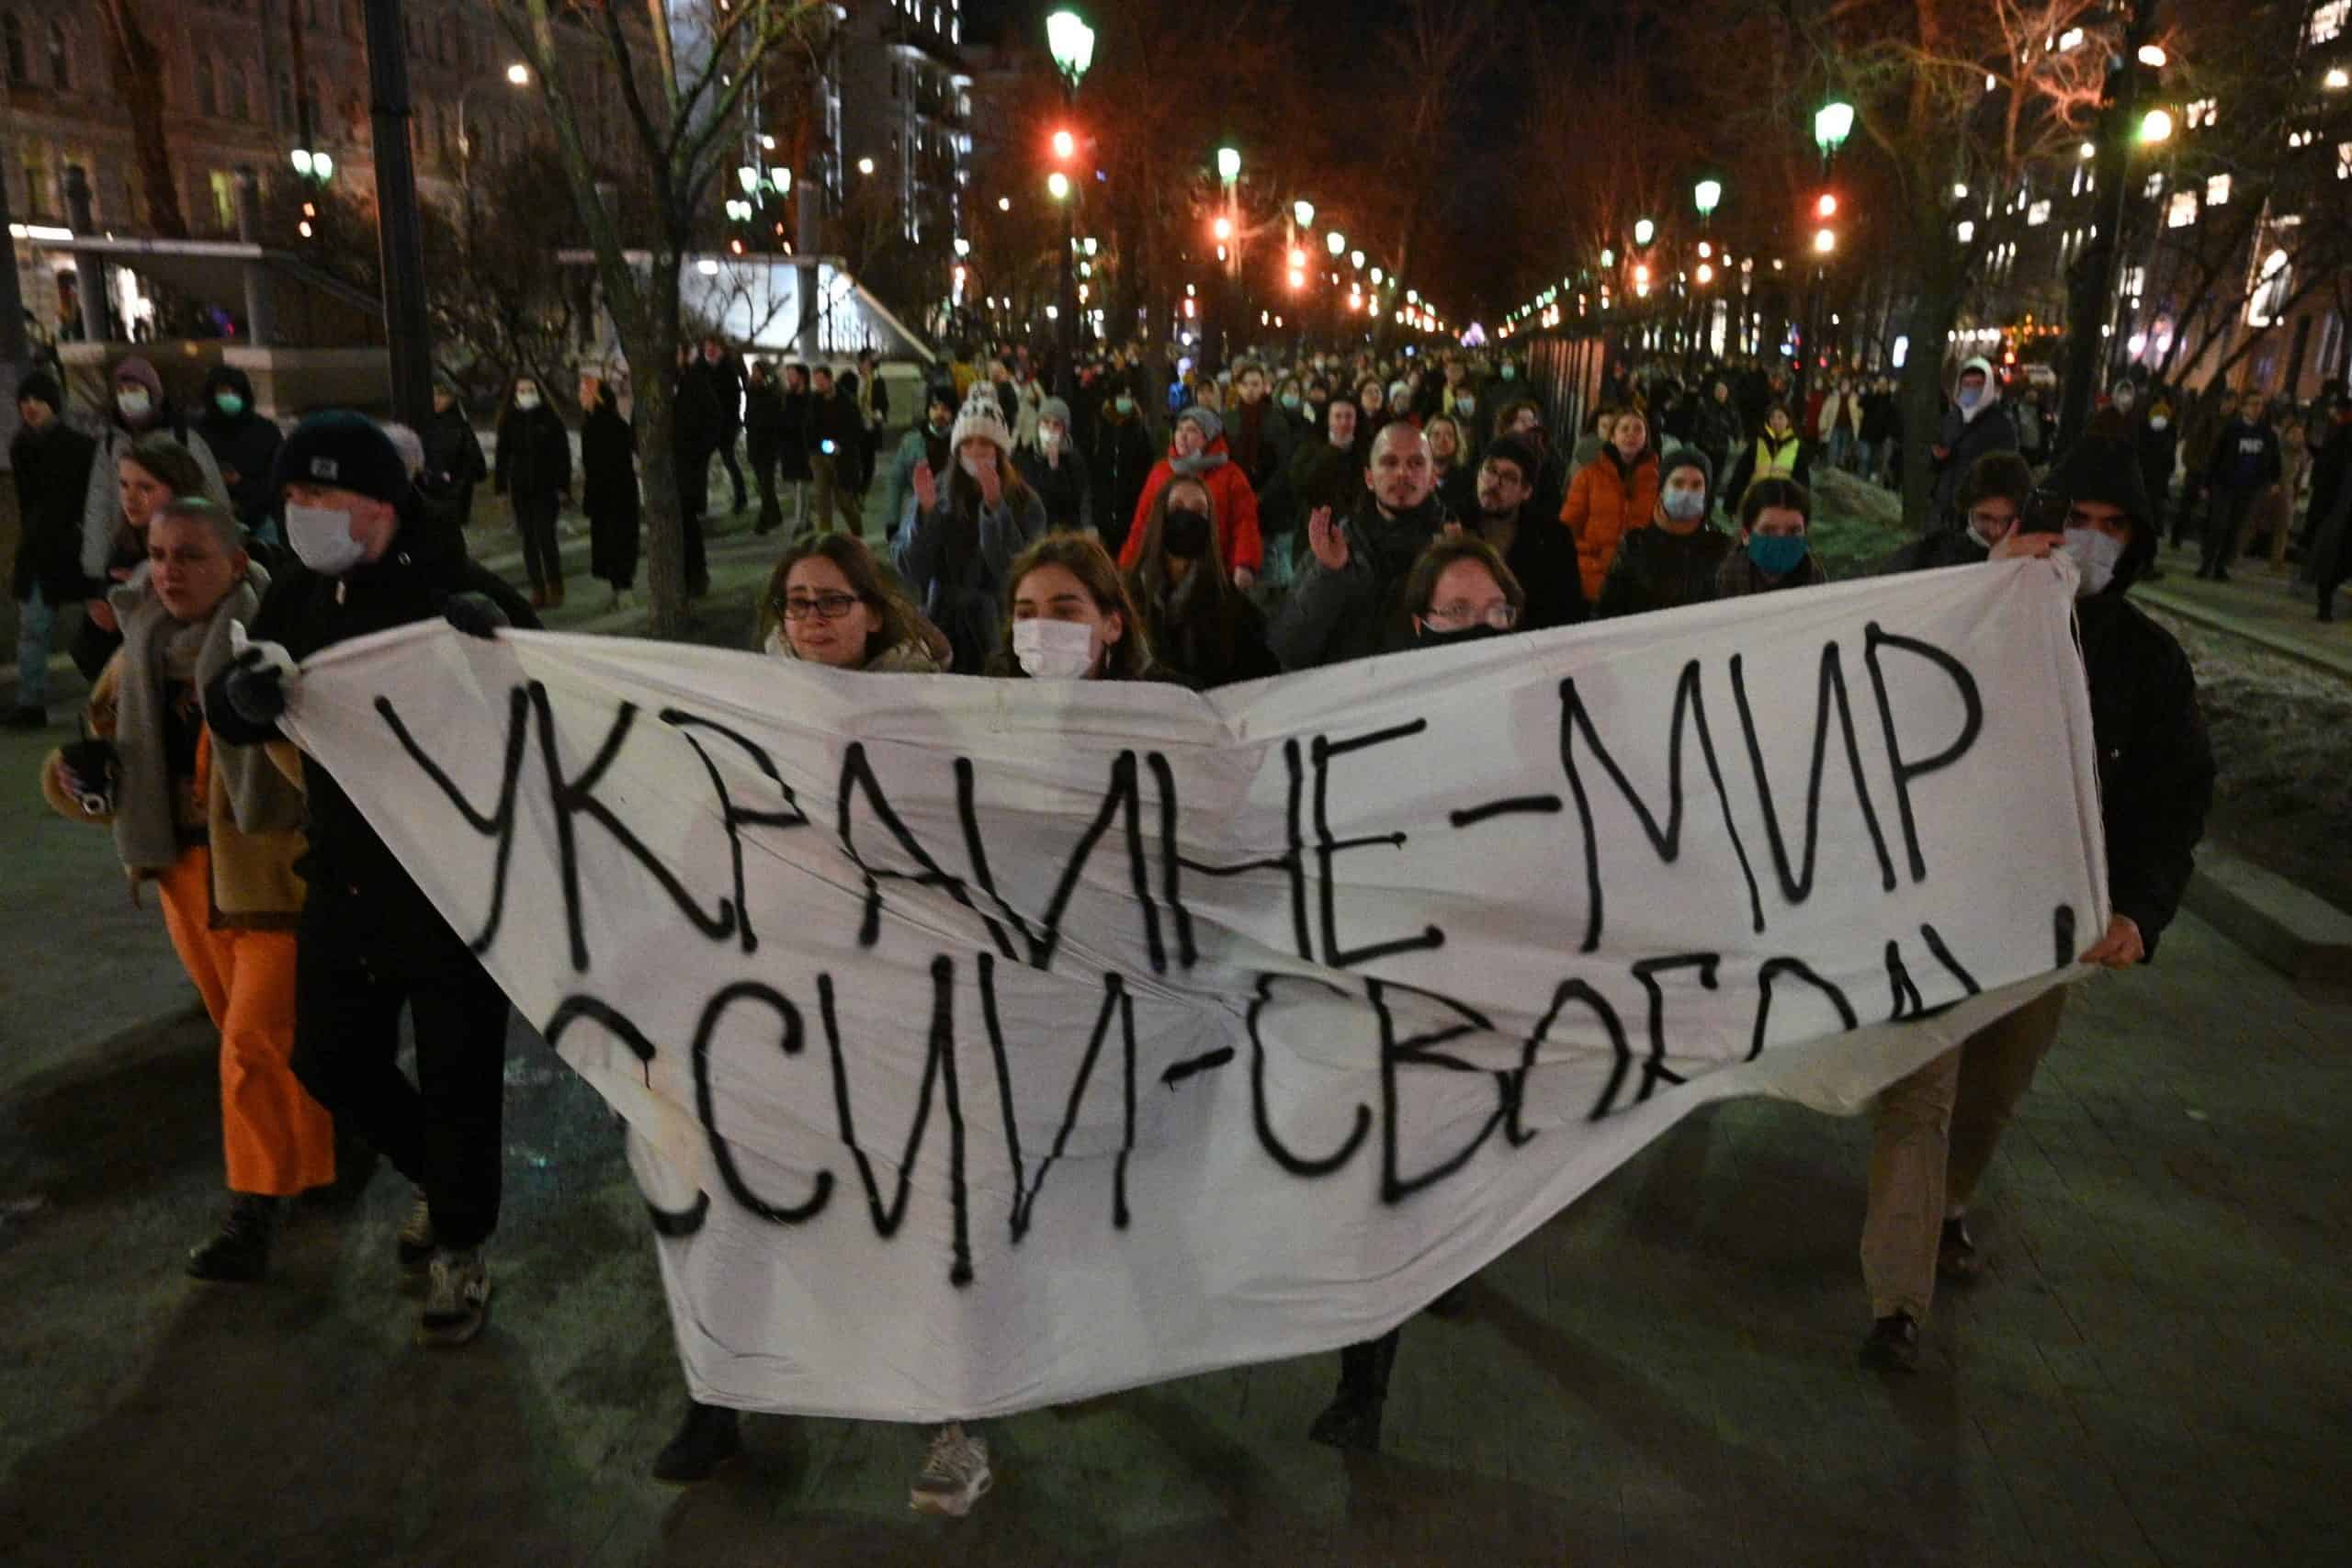 In pictures: Thousands of Russians take to the streets in protest over Ukraine attack